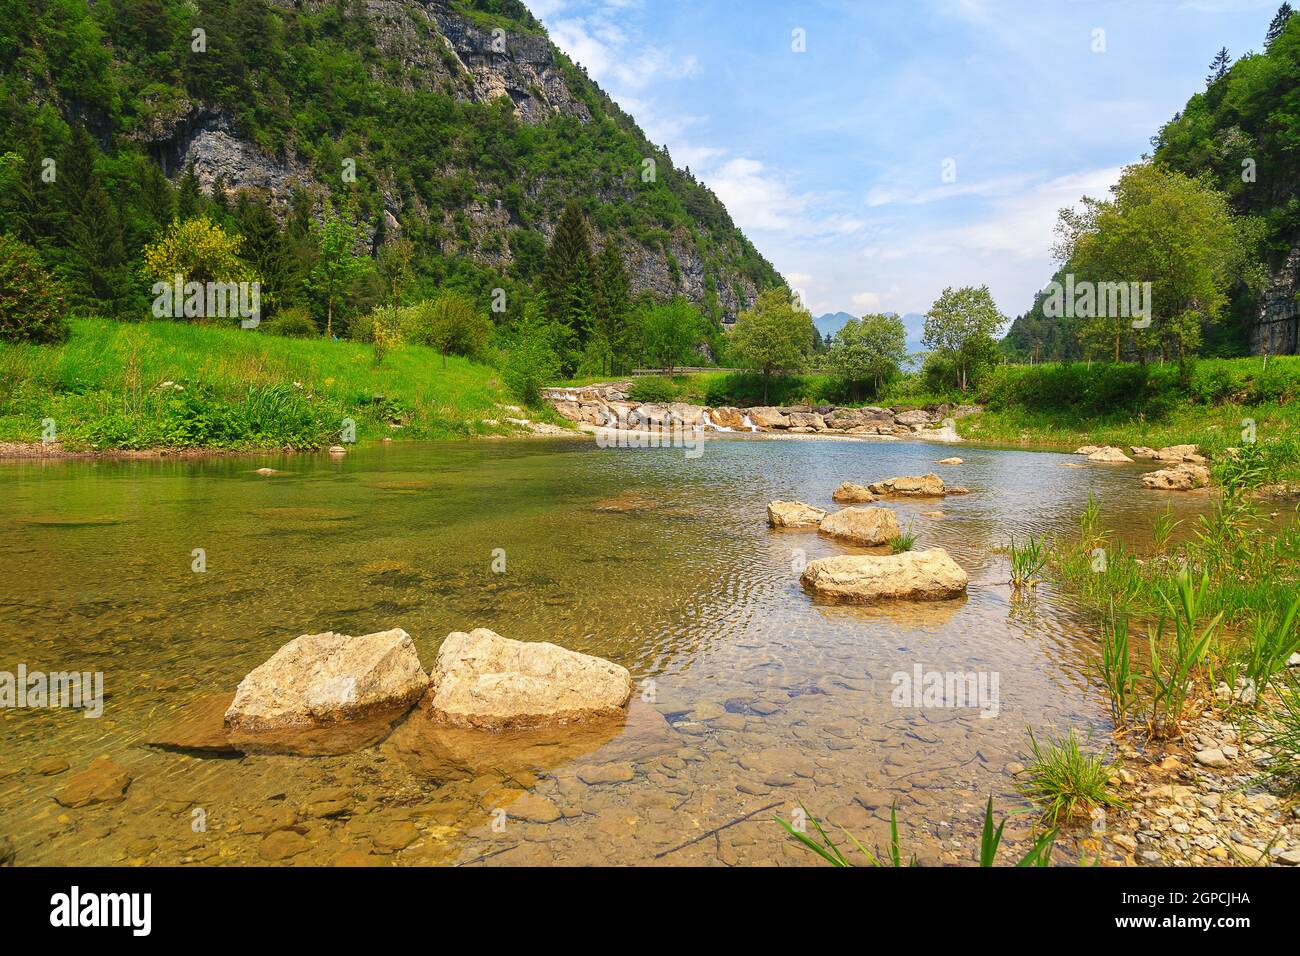 Panoramic natural landscapes. Wide-open spaces. Bagolino, Gaver locality, Valle Sabbia, Lombardy region in Italy. Stock Photo